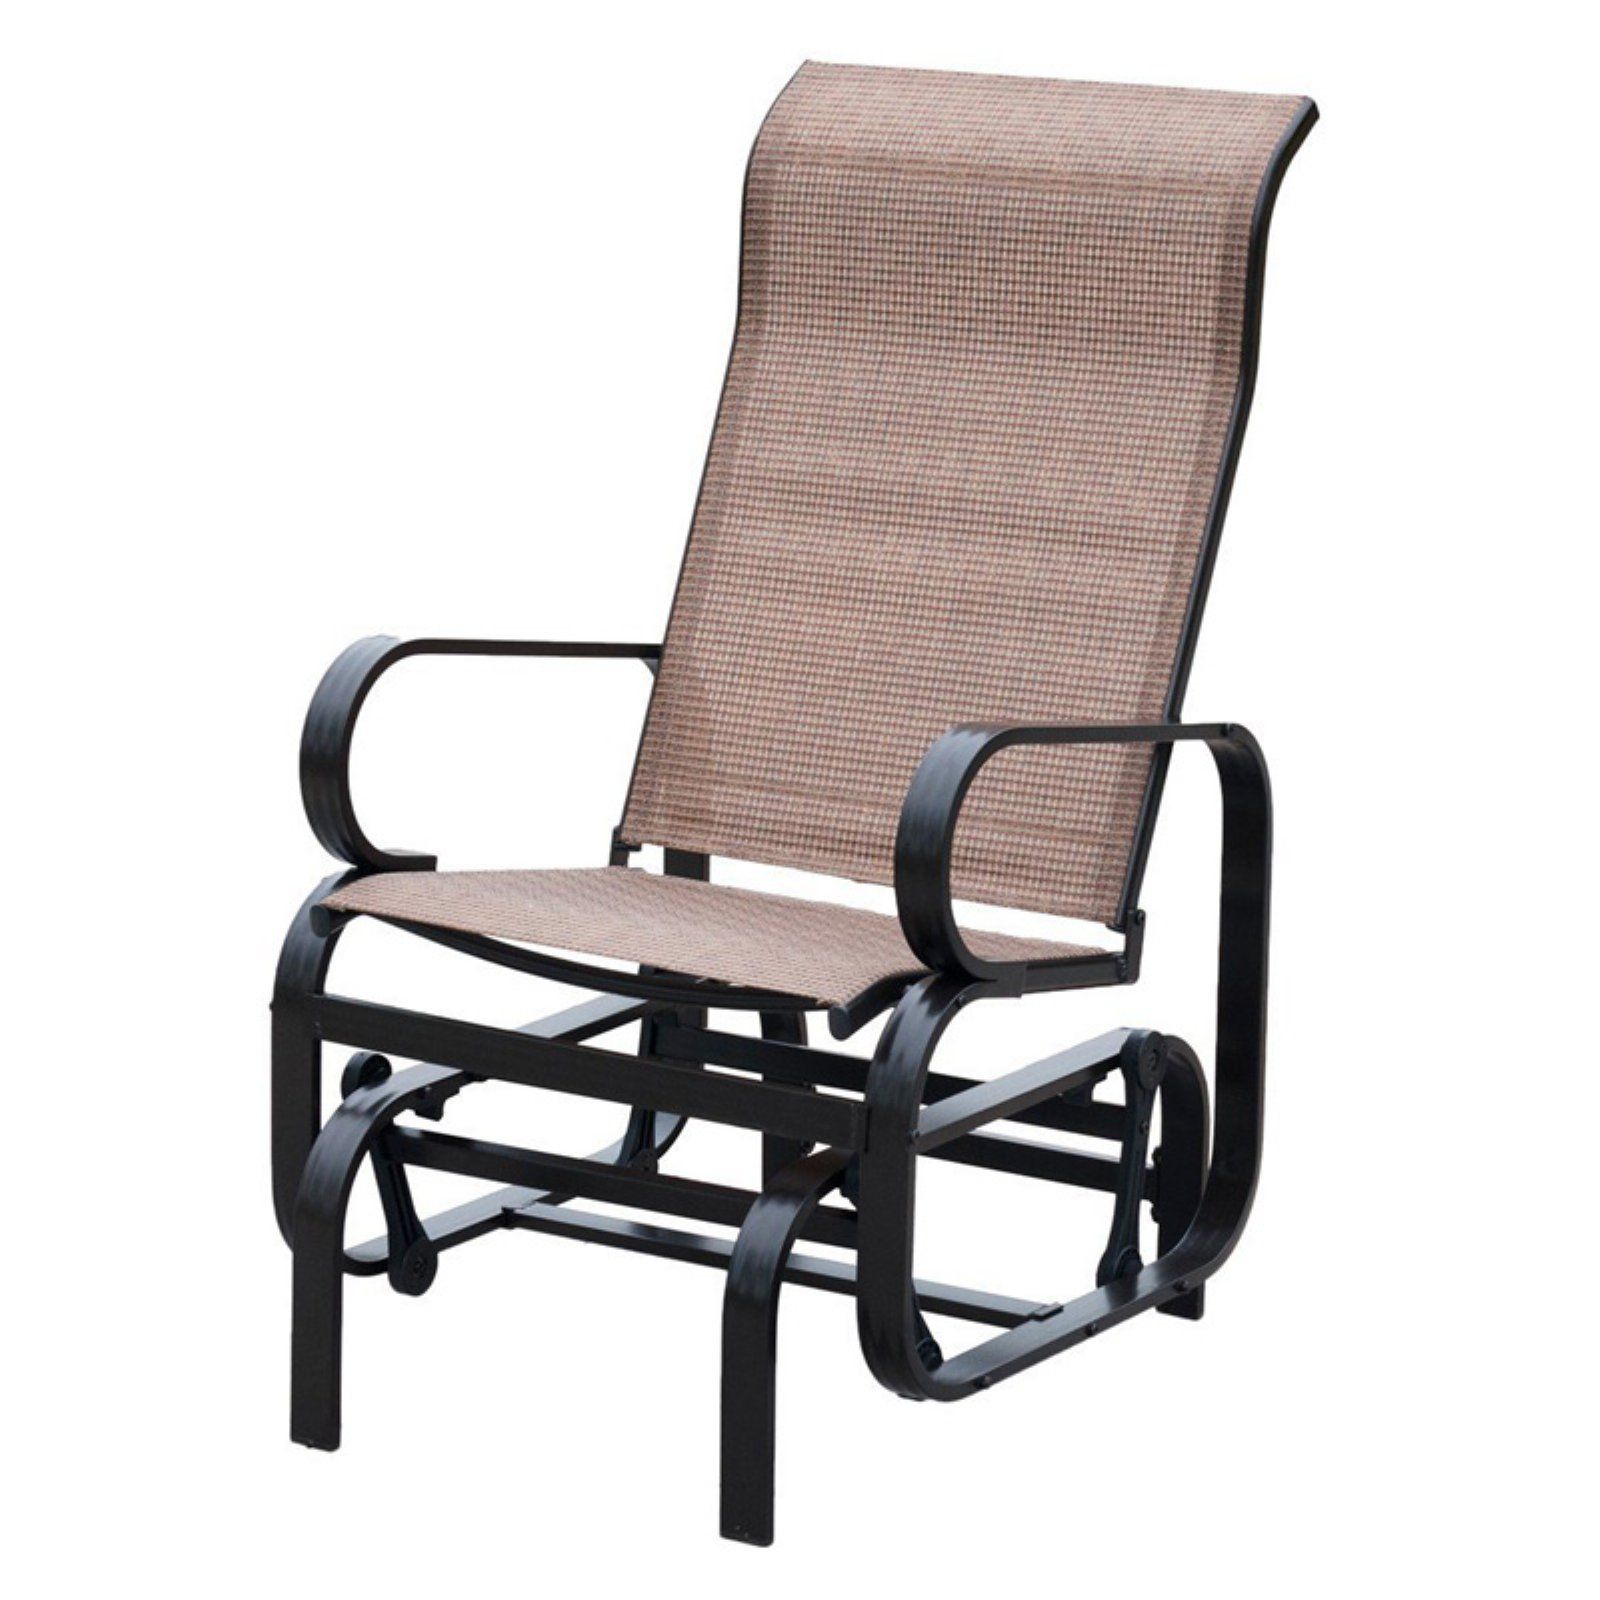 Chair Double Bates Crosley Swing Sofa Home Swivel Rocker With Outdoor Patio Swing Glider Bench Chair S (Photo 11 of 25)